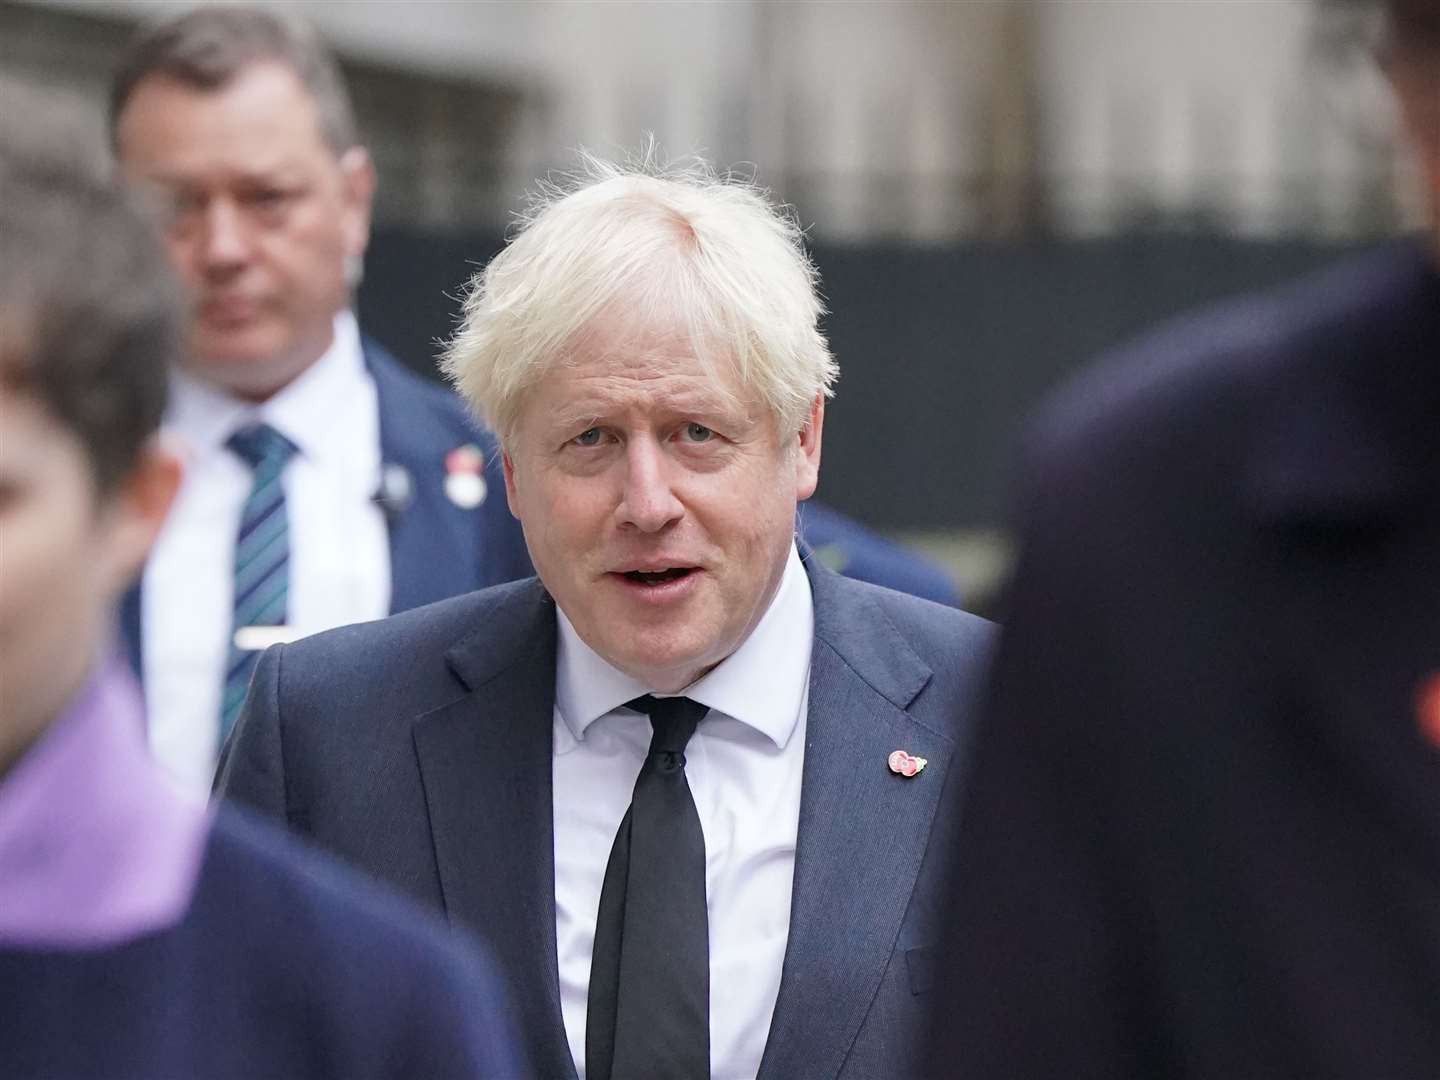 Boris Johnson’s lawyers said he has ‘no objection’ to the inquiry having the unredacted material, subject to ‘appropriate security and confidentiality arrangements’ (Jonathan Brady/PA)